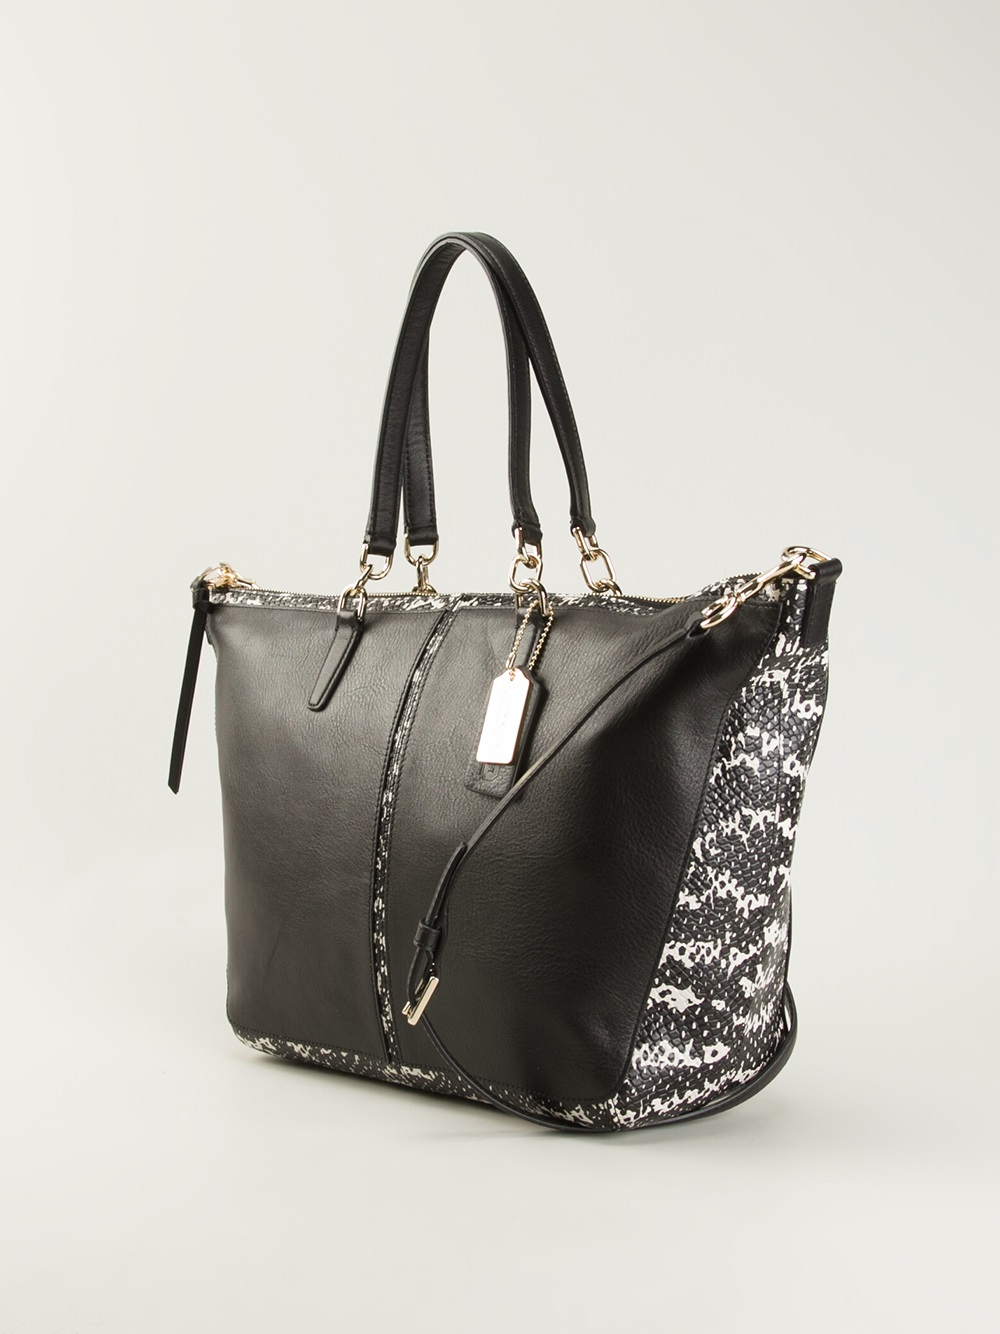 COACH Large Tote Bag in Black - Lyst